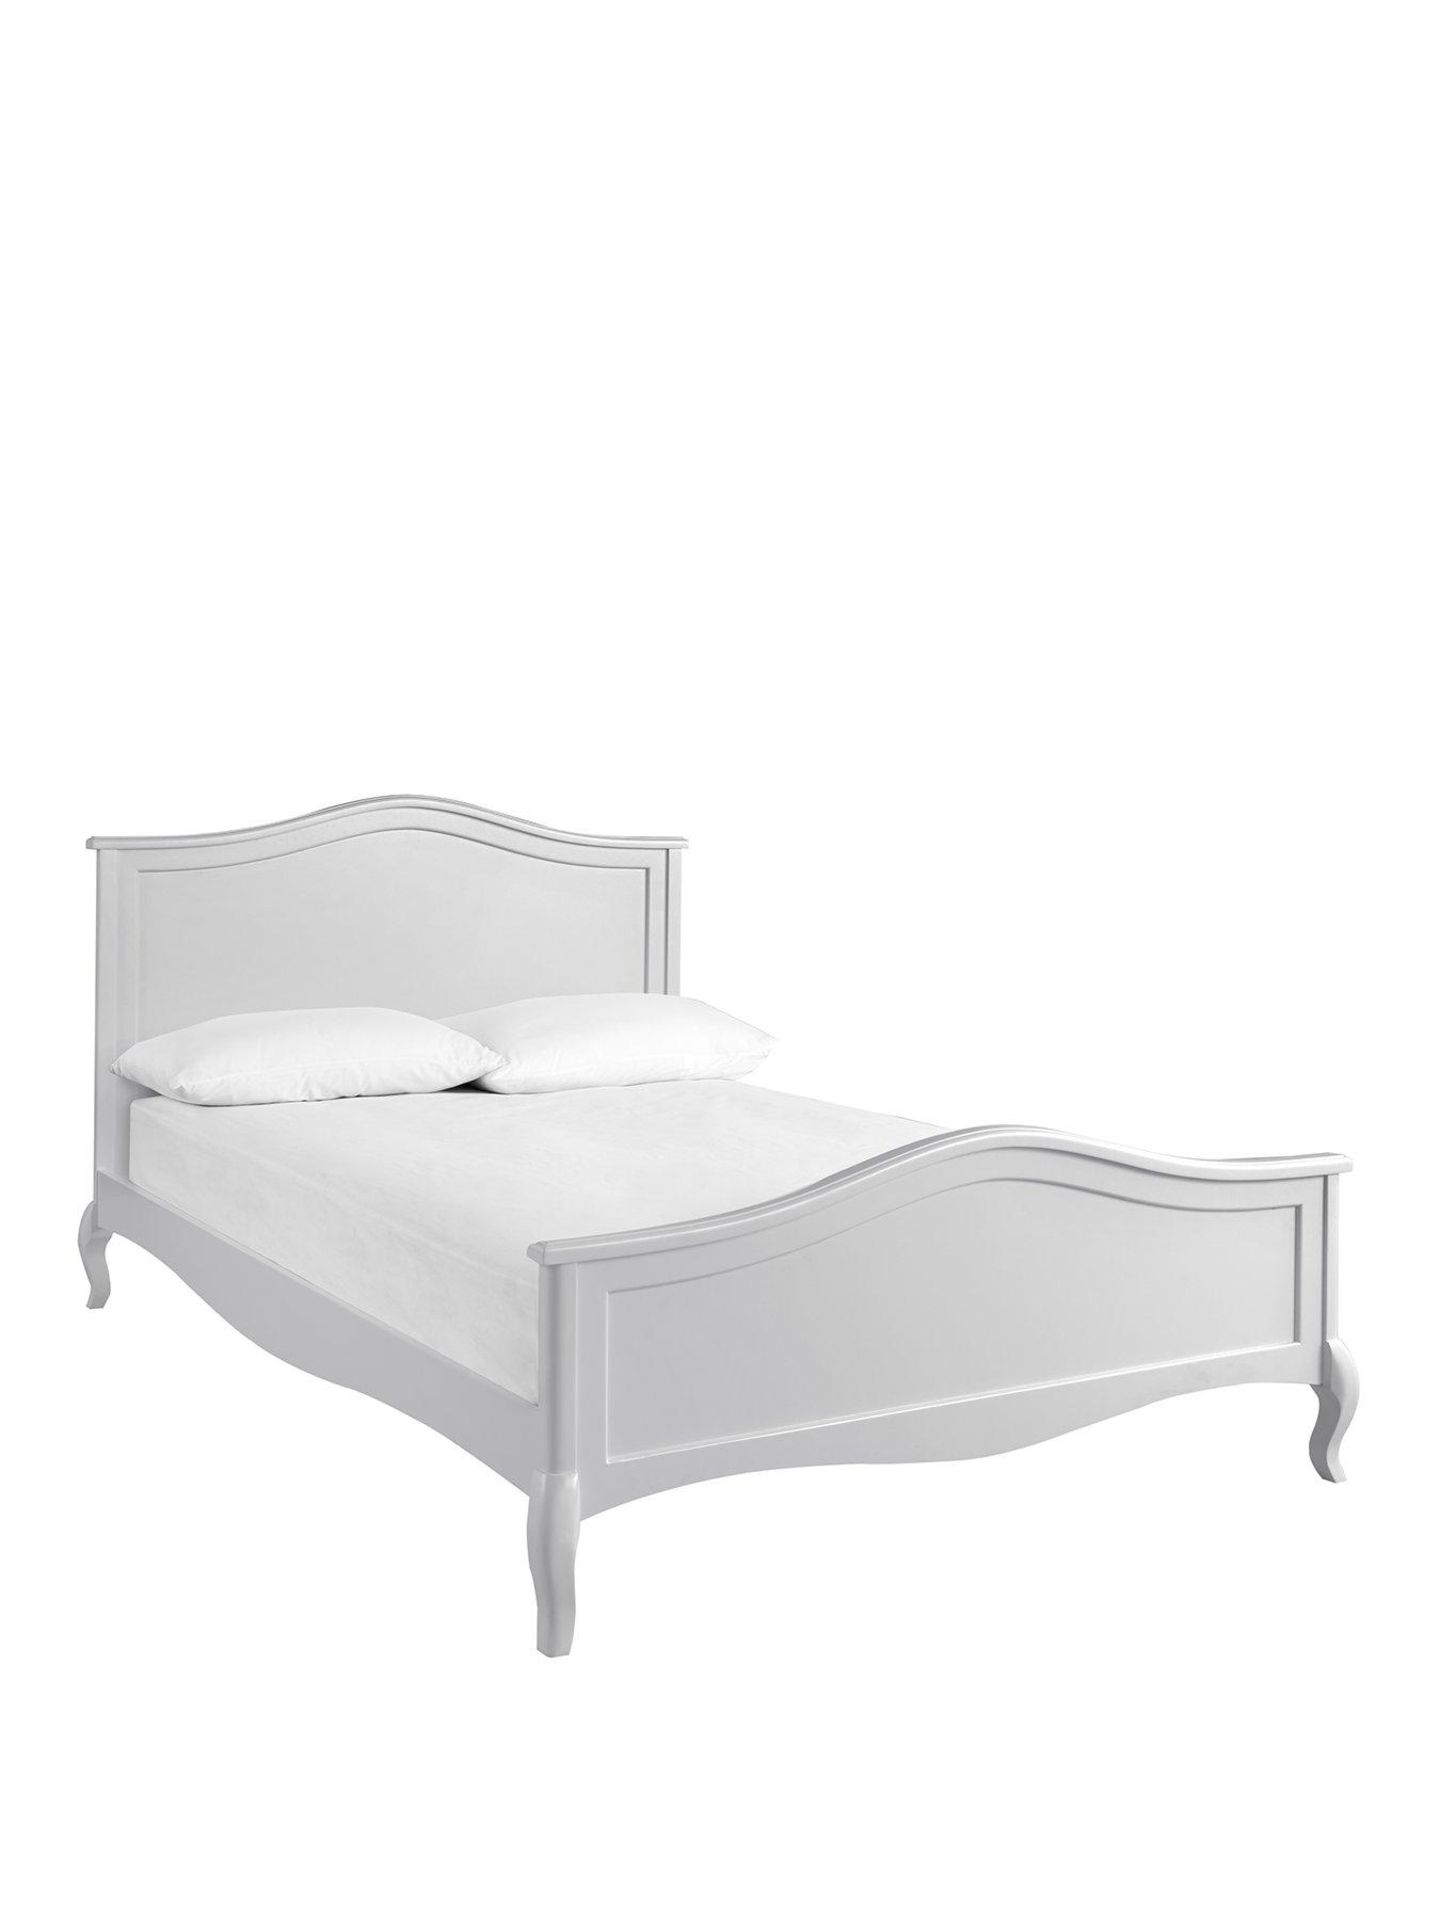 Boxed Item Olivia Double Bed [Grey] 110X145X198Cm Rrp:¬£465